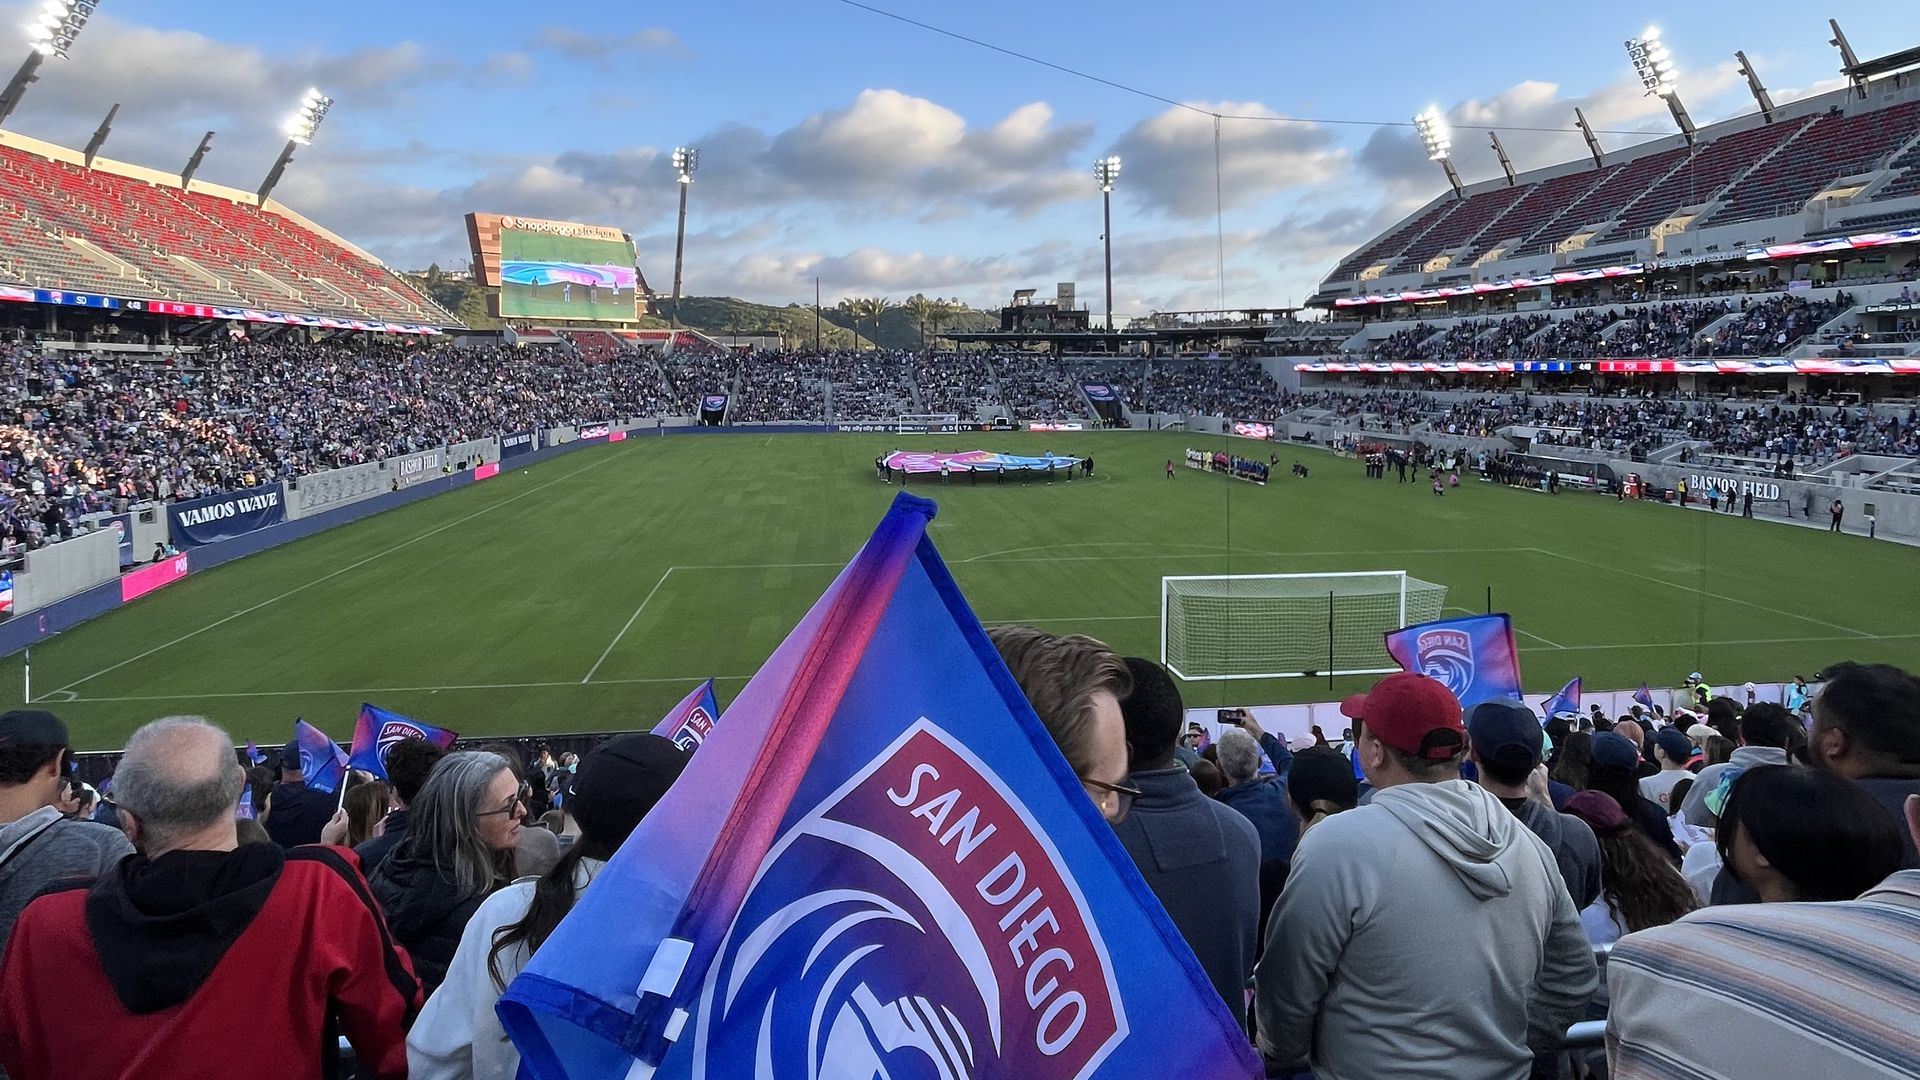 A fan waves a blue and pink flag with a San Diego wave logo as others fill the seats in a large stadium for a professional women's soccer game. 